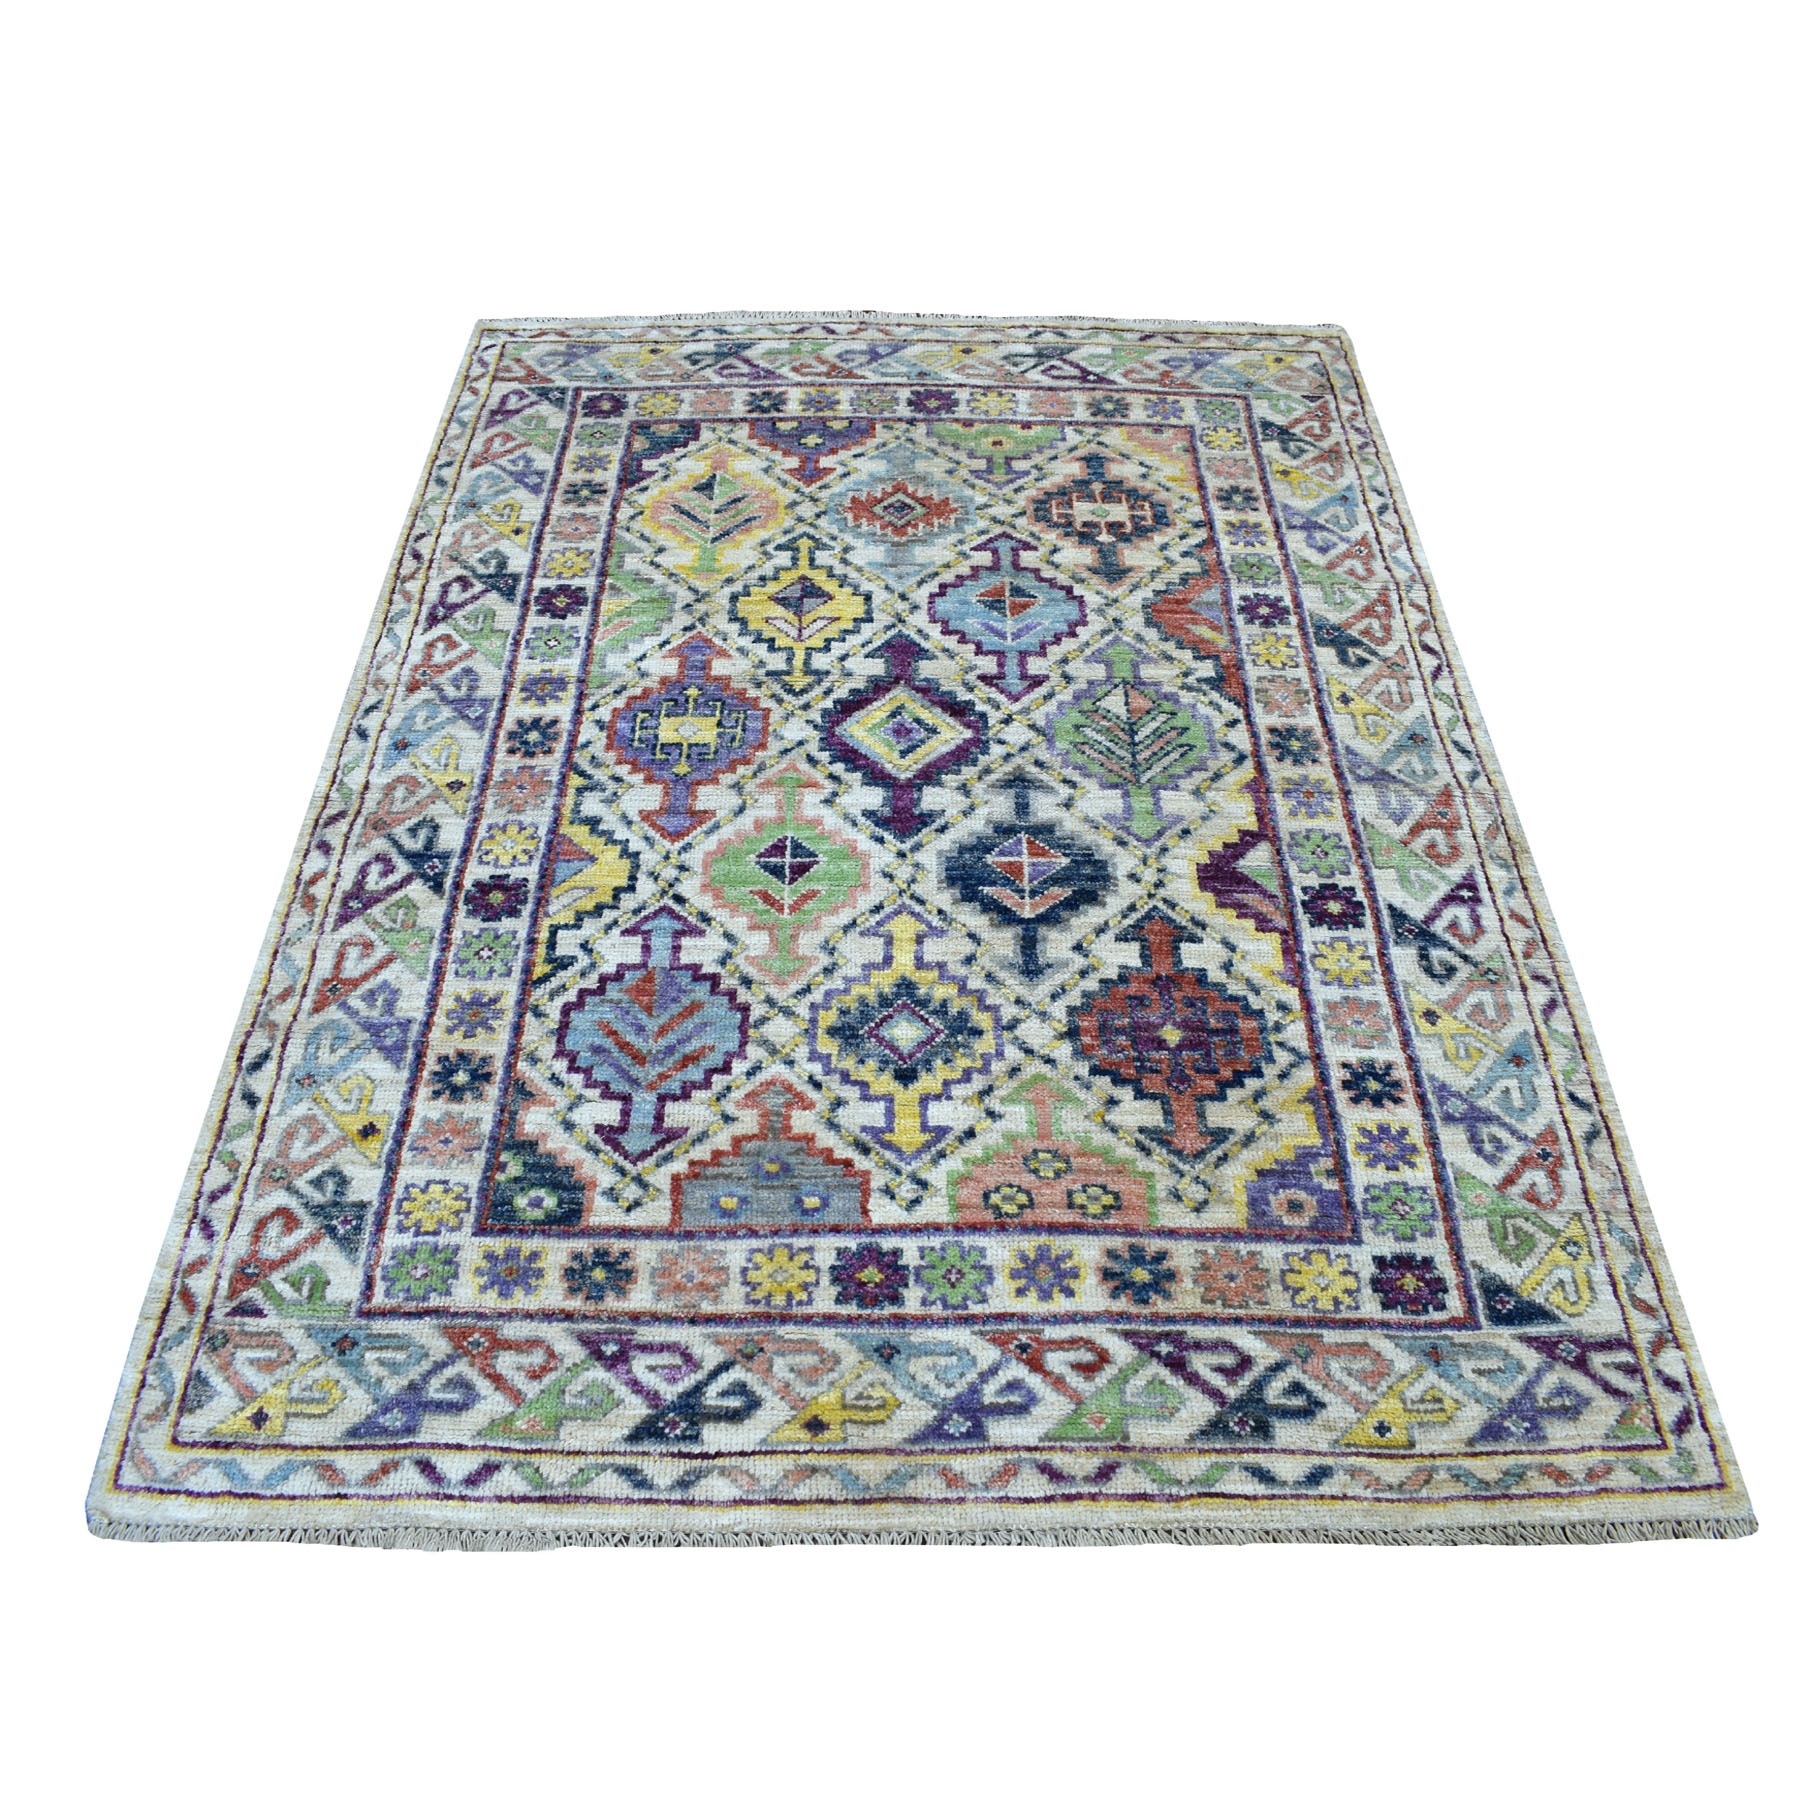 5'X6'7" Ivory Tribal Design Colorful Afghan Baluch Hand Knotted Pure Wool Oriental Rug moaedad6